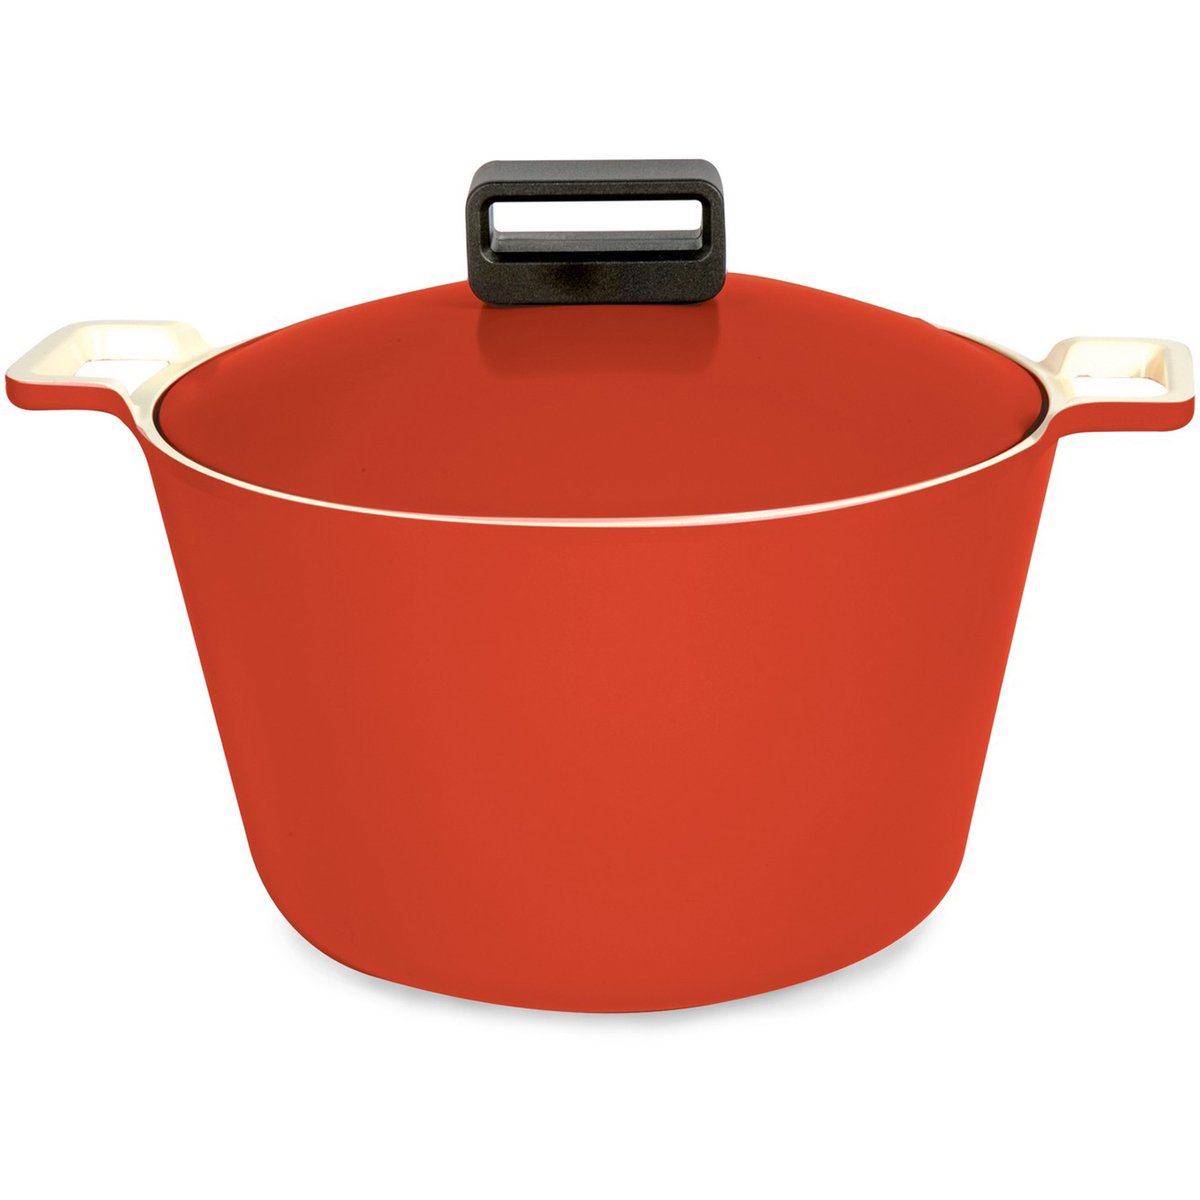 Neoflam Cube Die-Casted Deep Casserole 26cm Assorted Colors